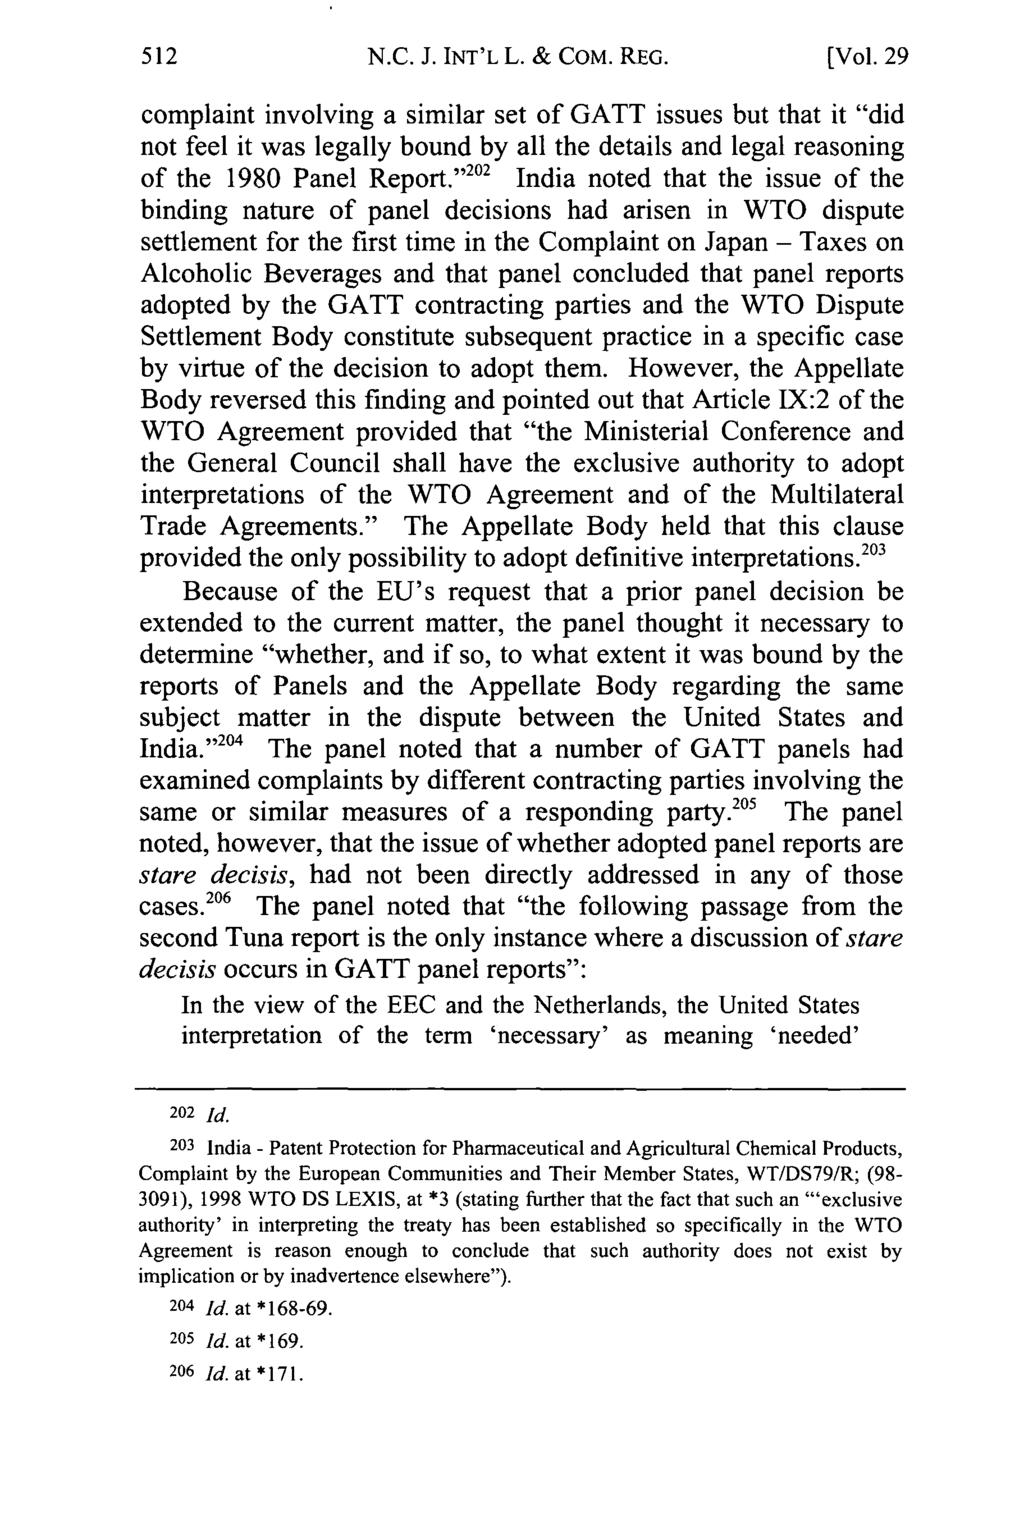 N.C. J. INT'L L. & COM. REG. [Vol. 29 complaint involving a similar set of GATT issues but that it "did not feel it was legally bound by all the details and legal reasoning of the 1980 Panel Report.